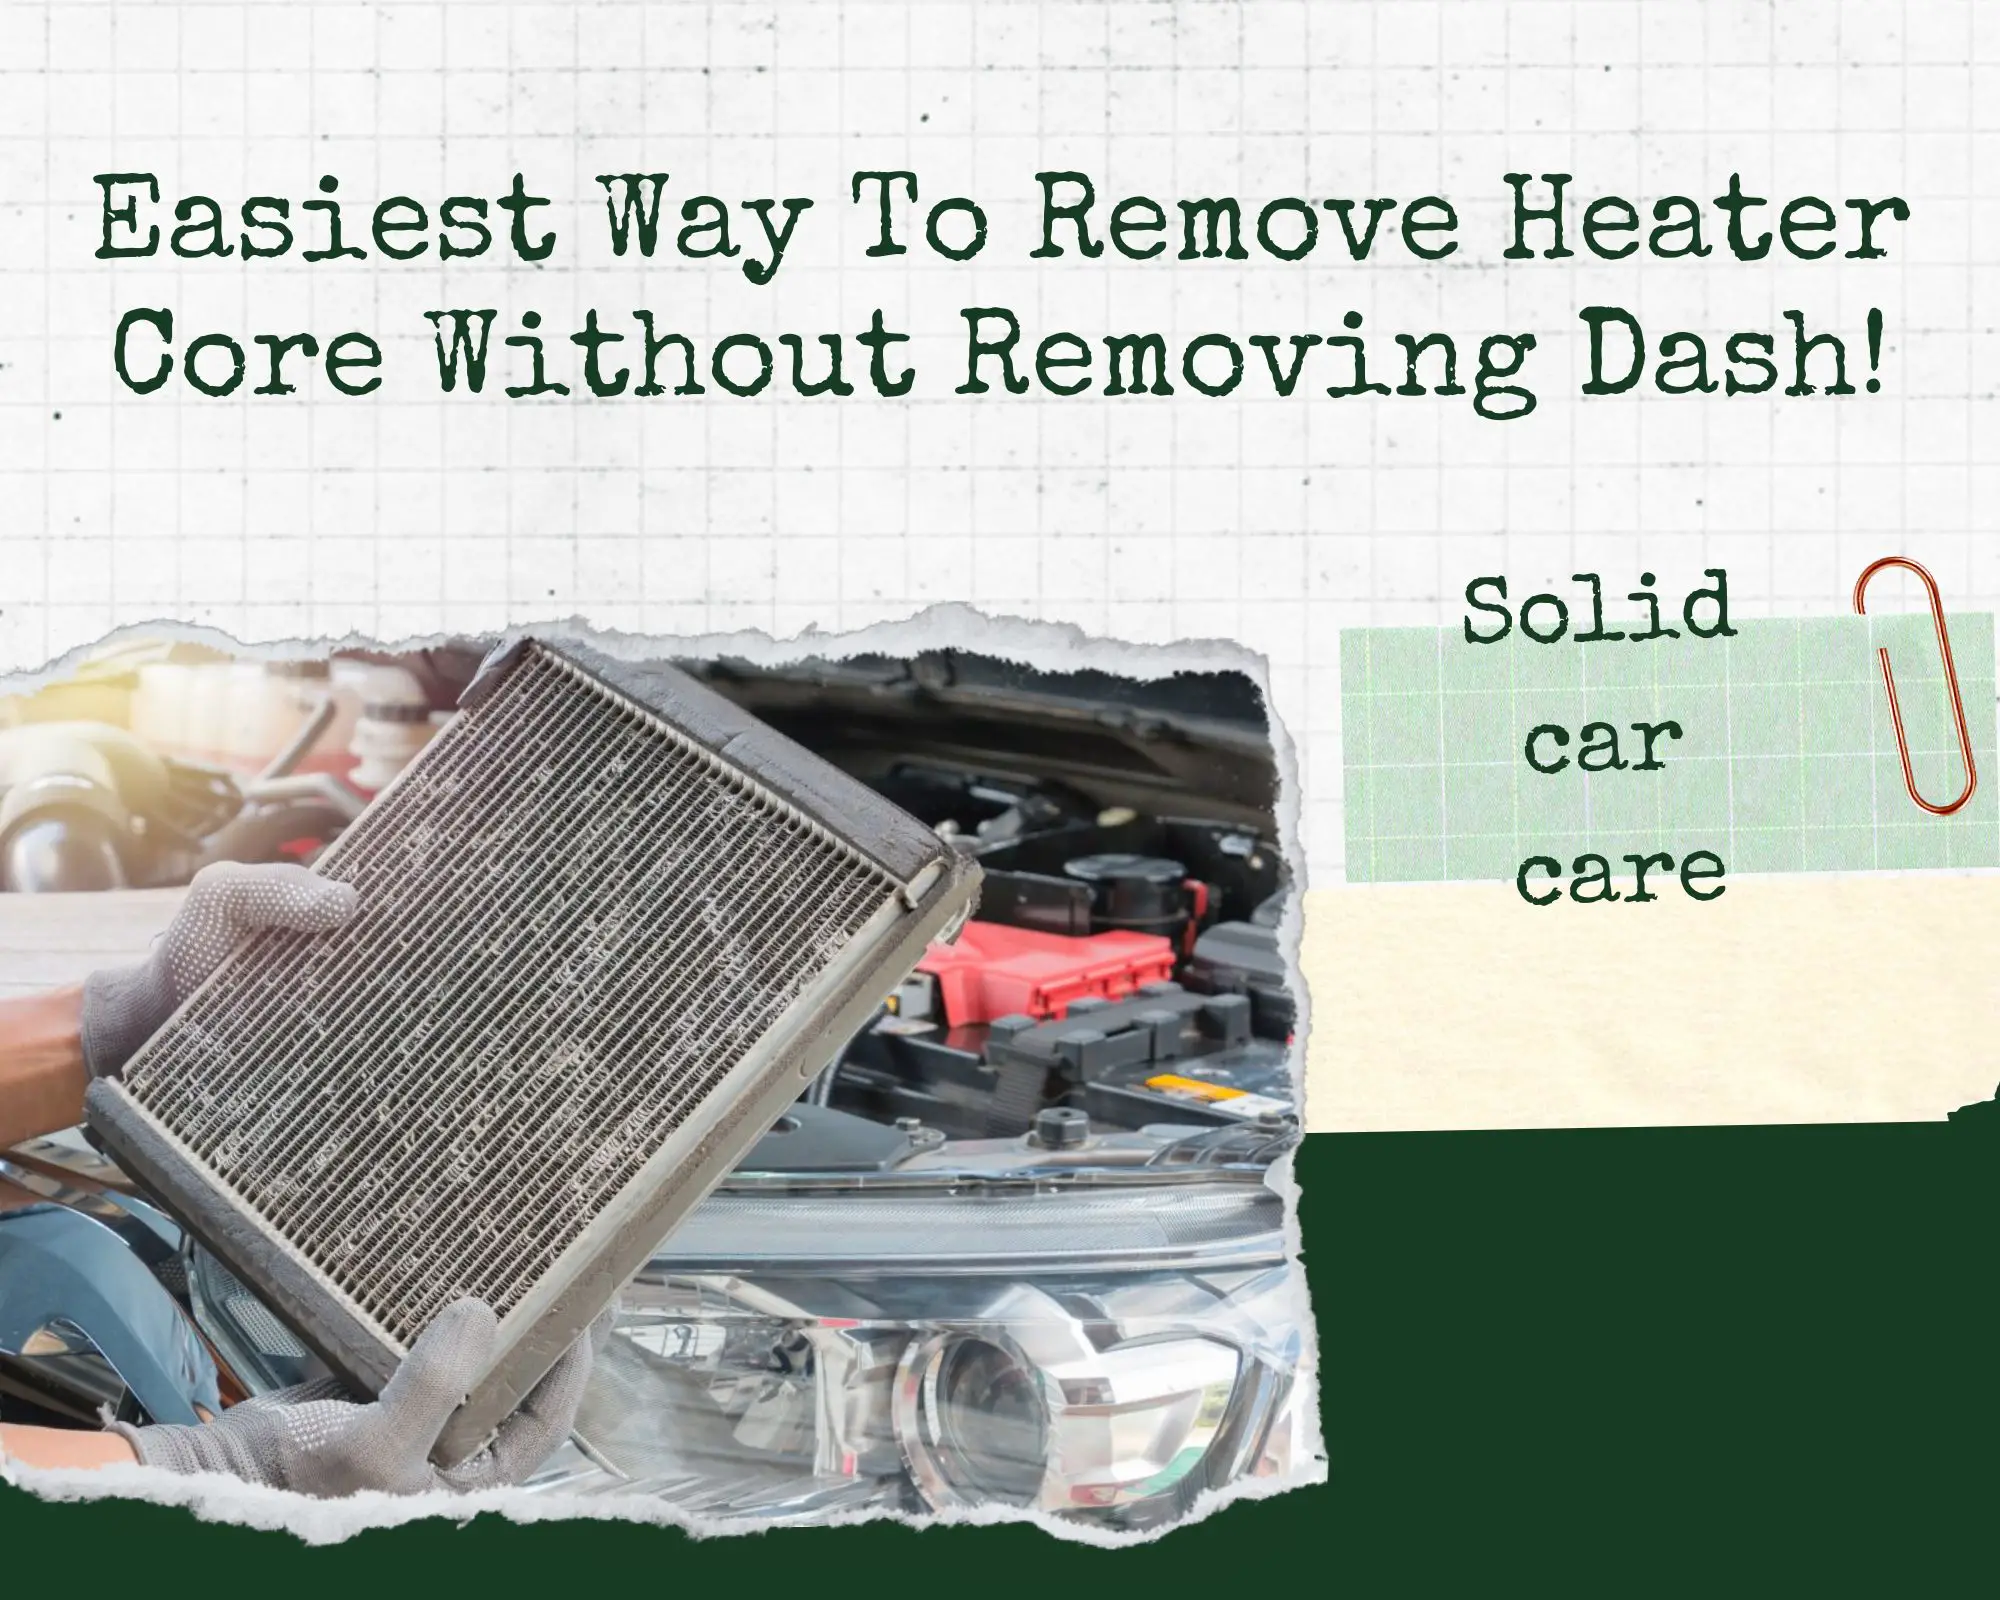 Way To Remove Heater Core Without Removing Dash!